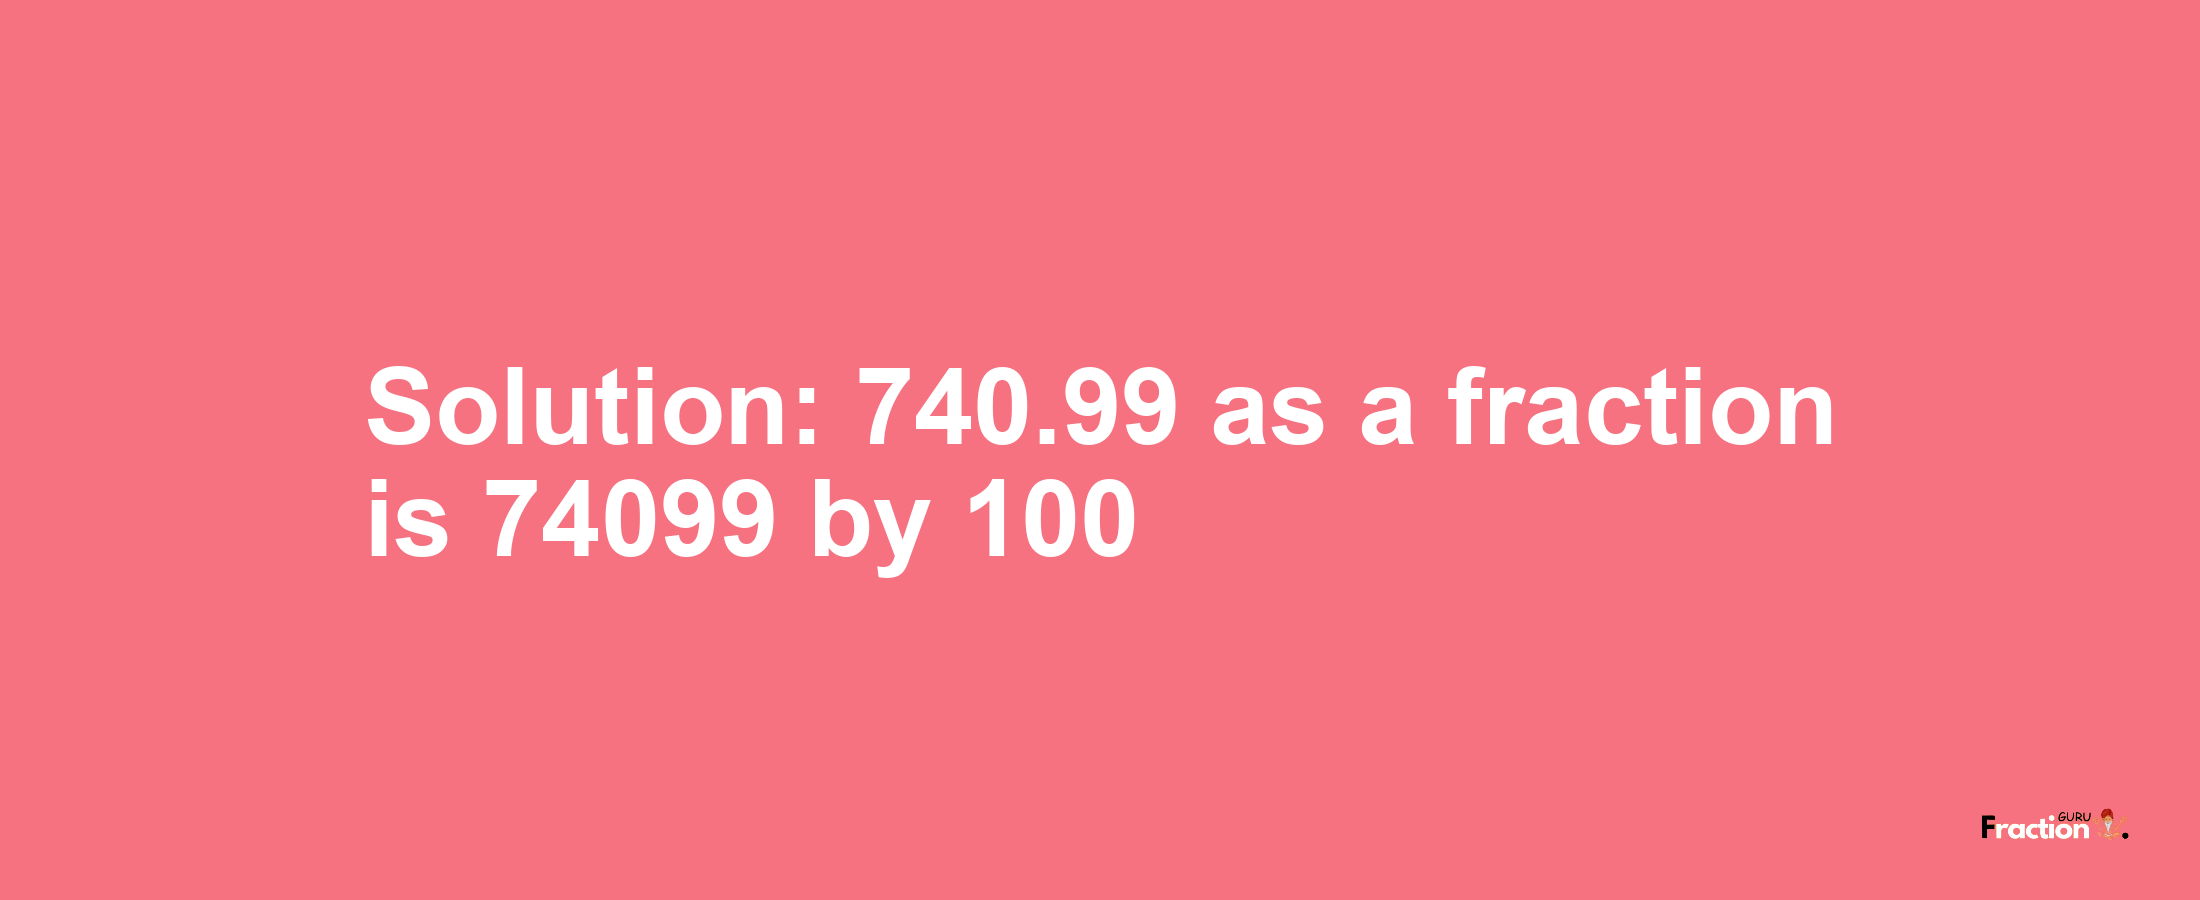 Solution:740.99 as a fraction is 74099/100